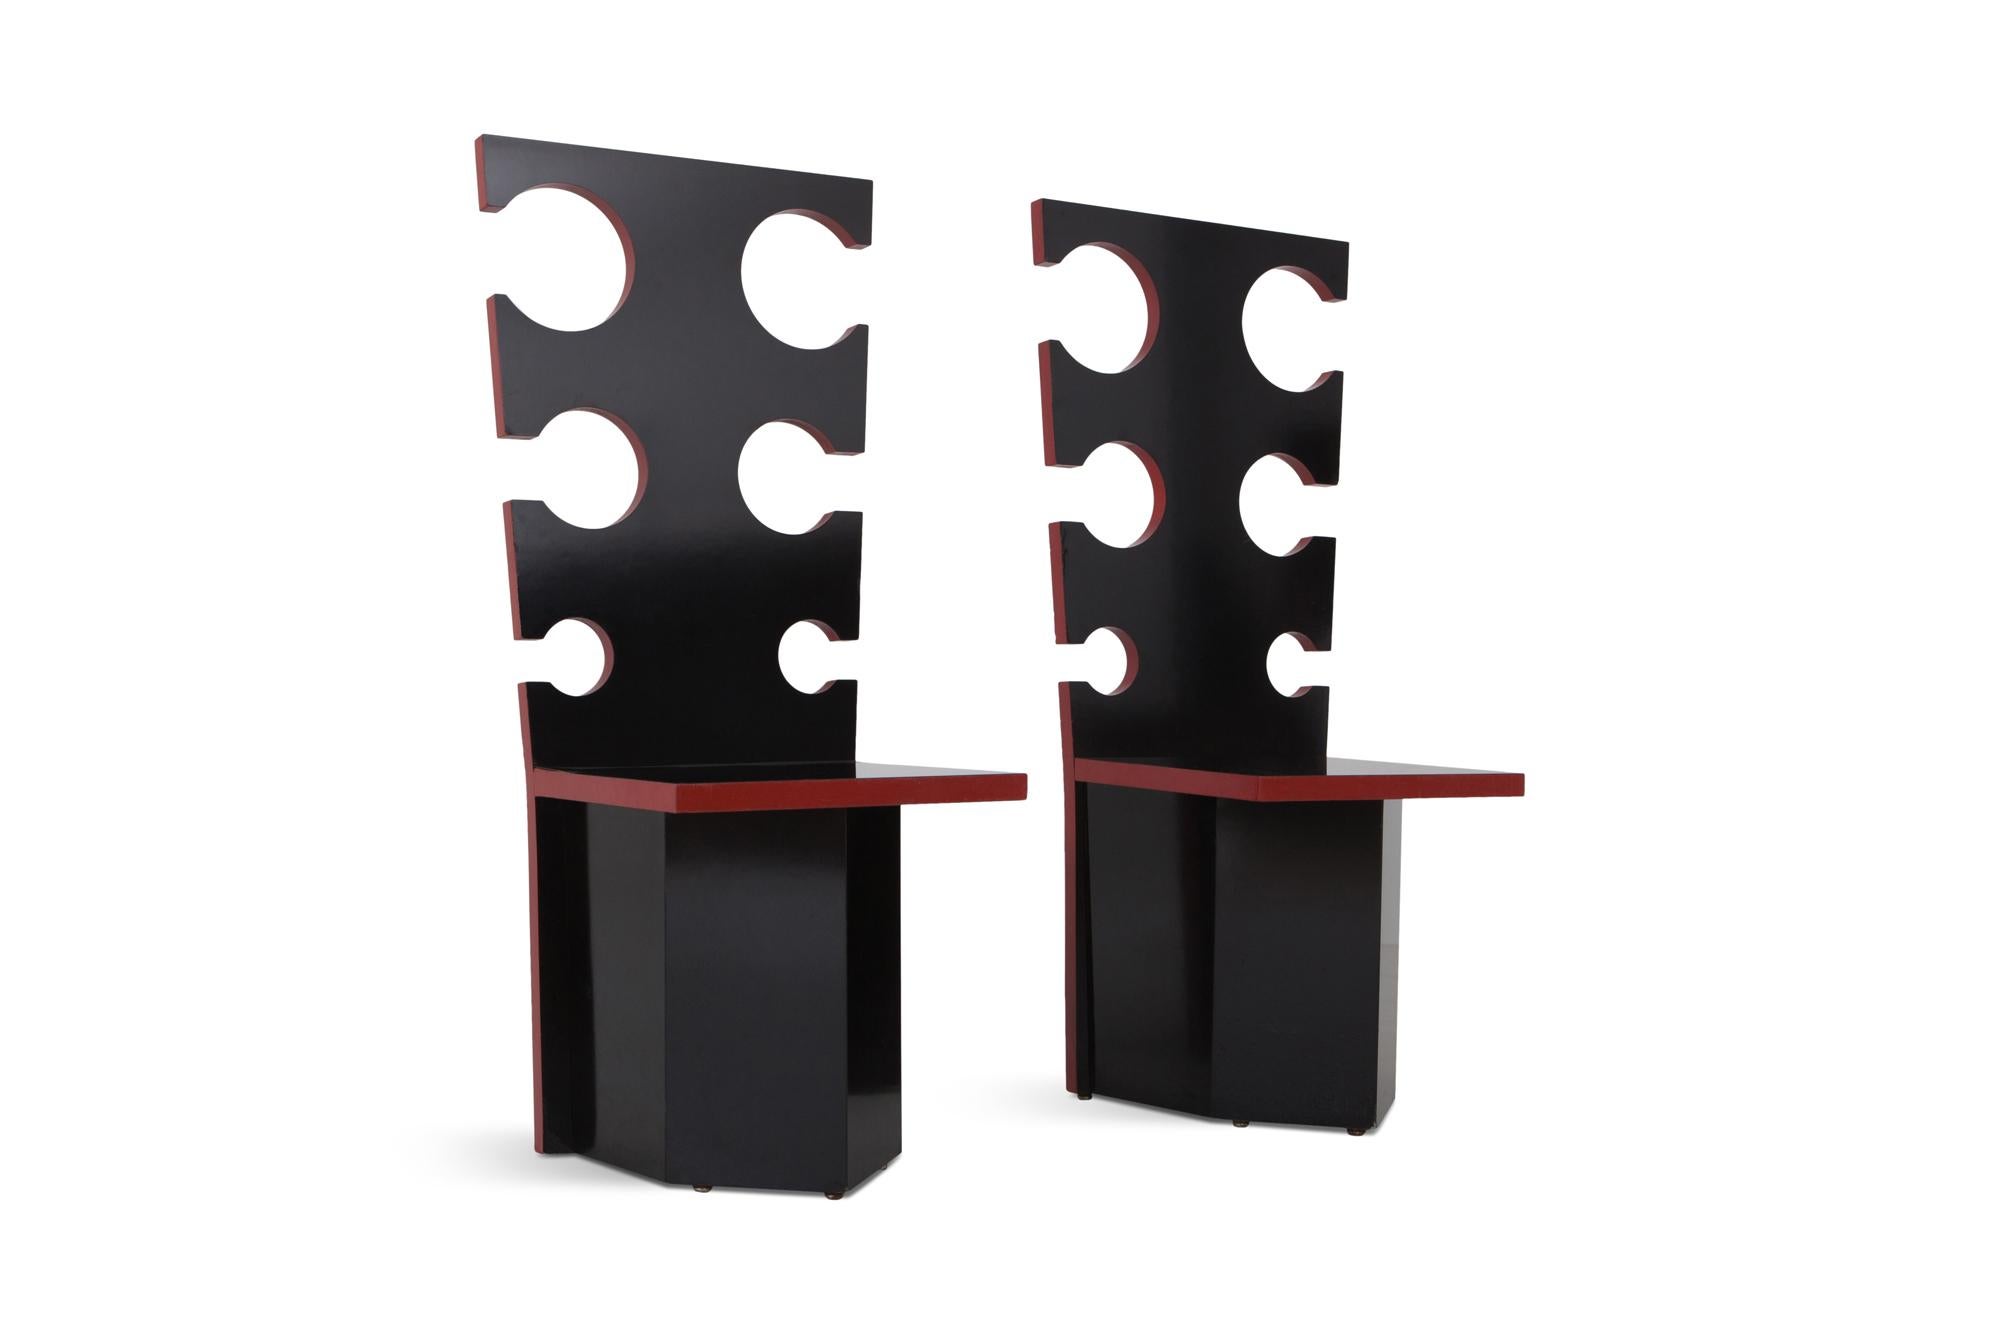 black lacquer with red edges by Max Papiri, functional art, collectible design 
Designed on request by and for the private home of Mario Sabot. The intriguing design shows straight cut-out backrests and rectangular seats on a polygonal base. The